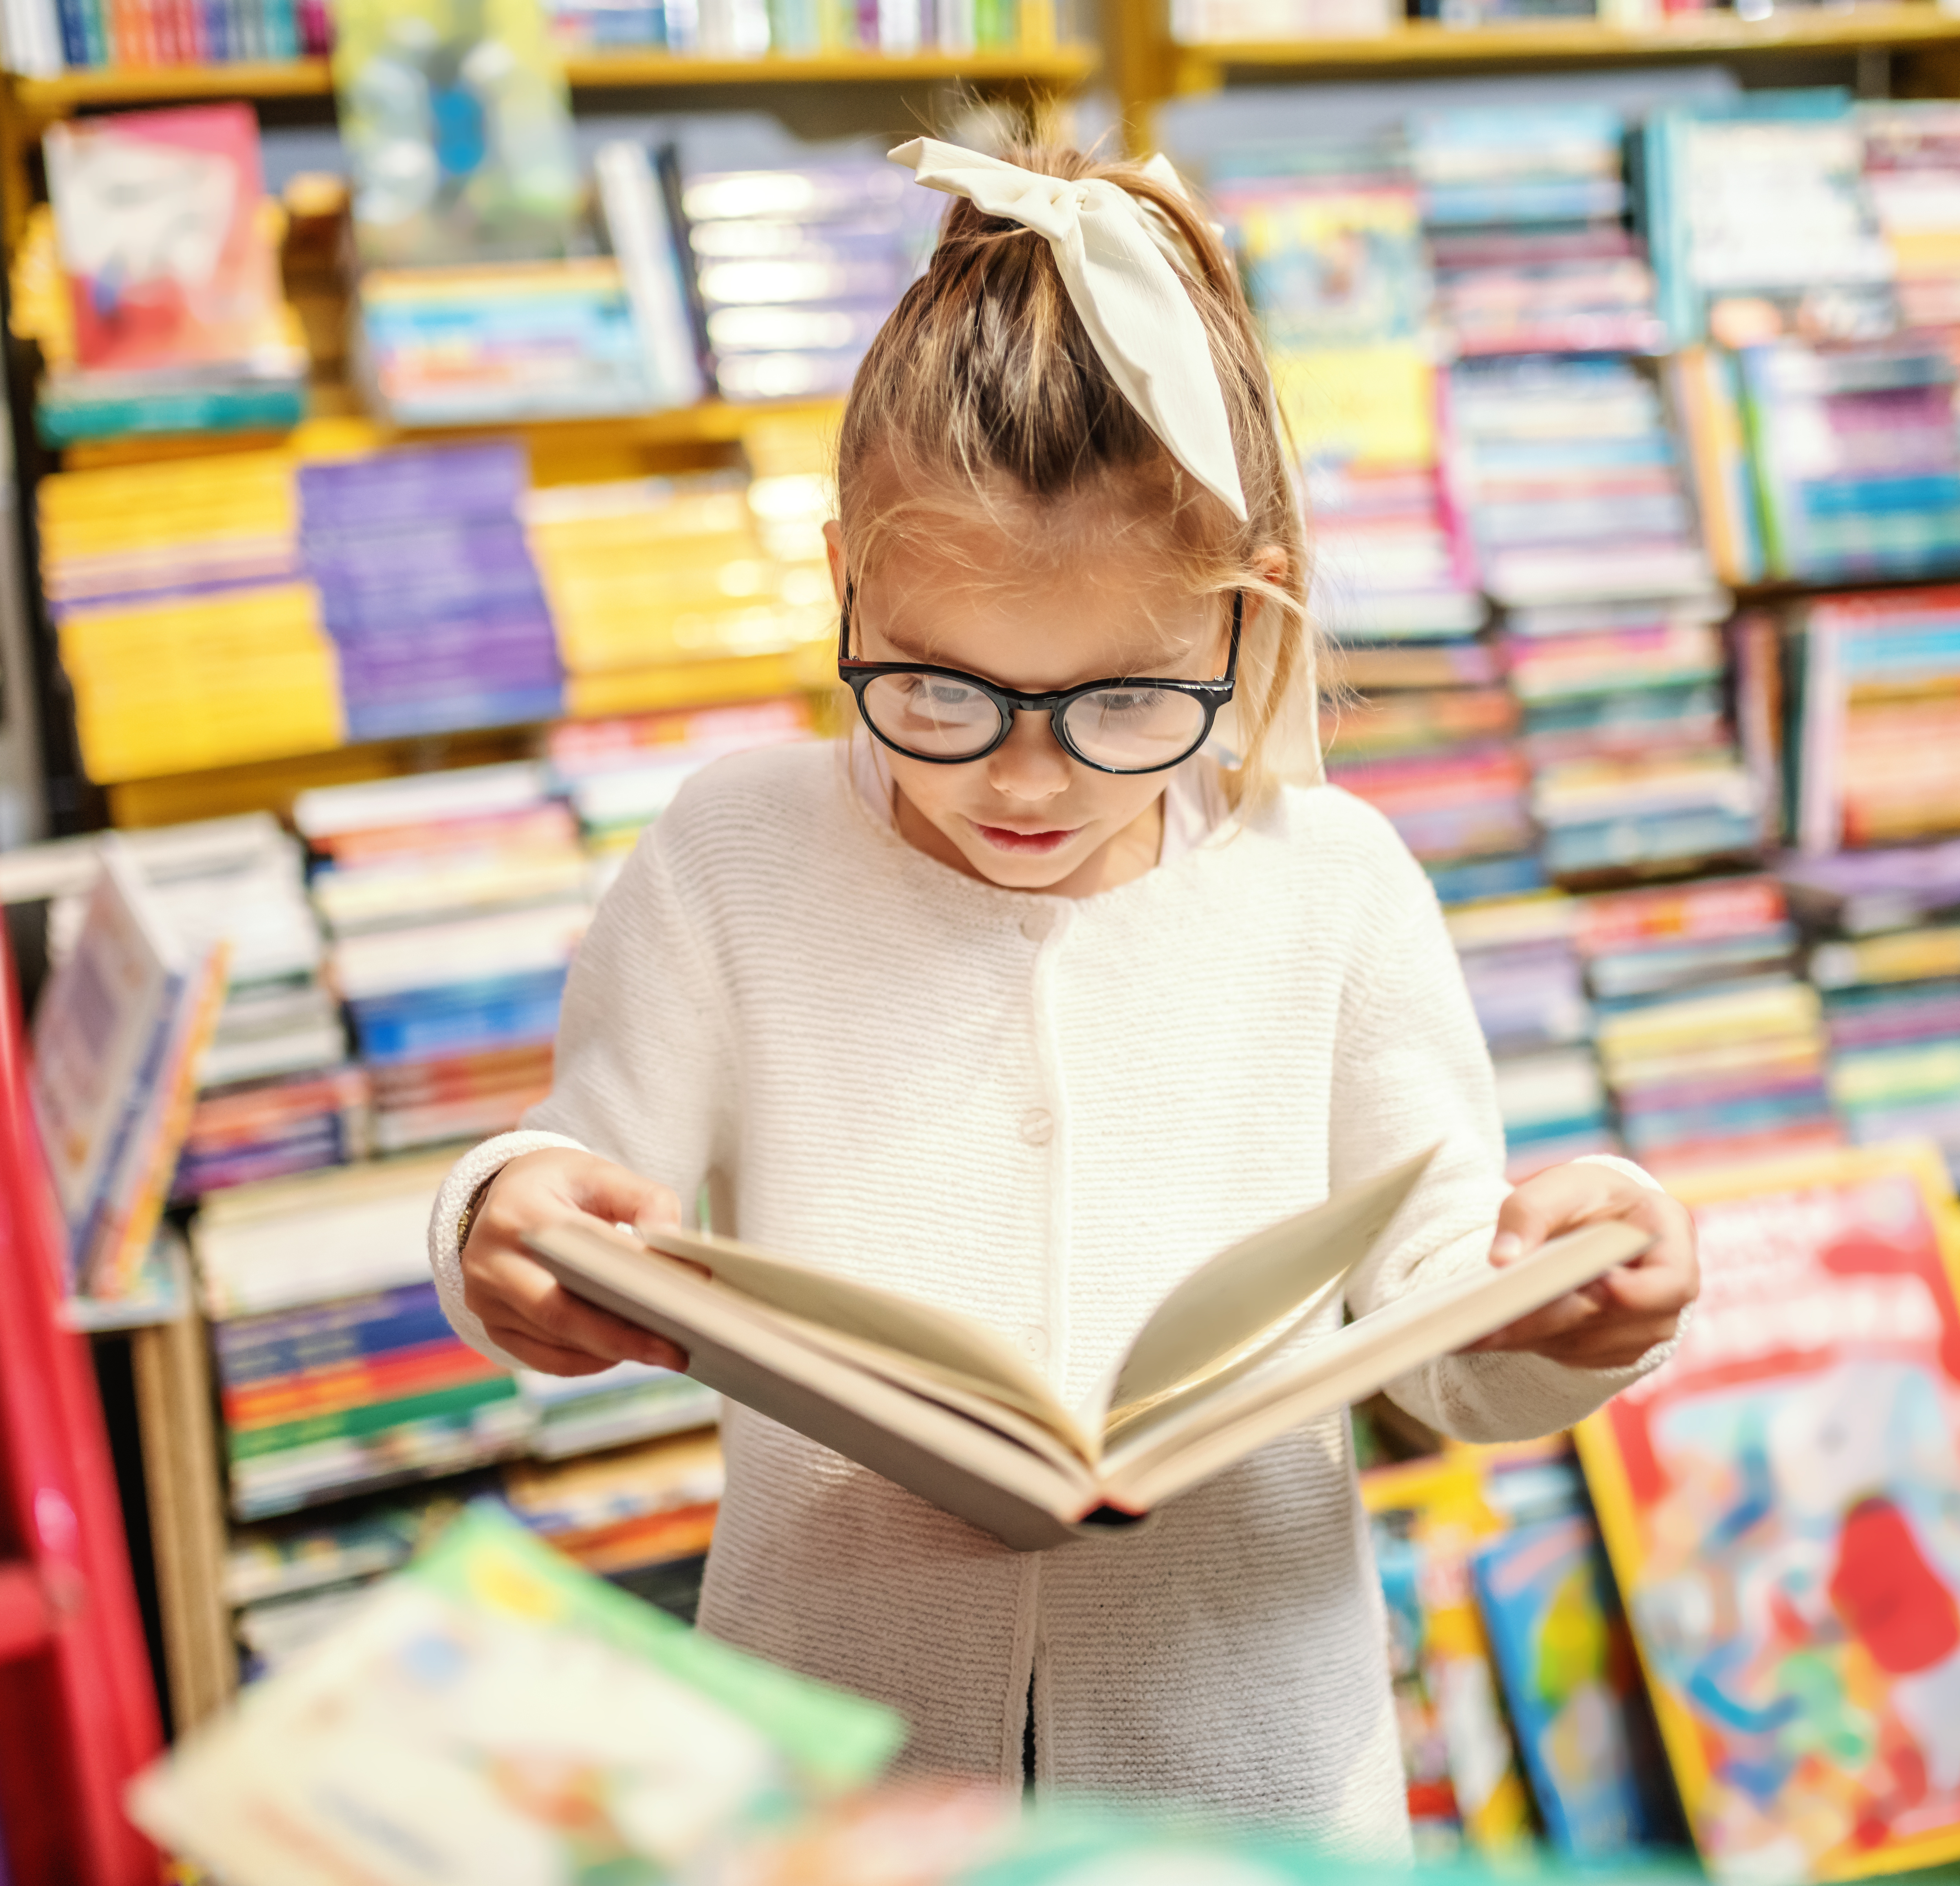 A little girl with glasses stands with an open book. Behind her are shelves full of books and there are some out of focus in the foreground. 